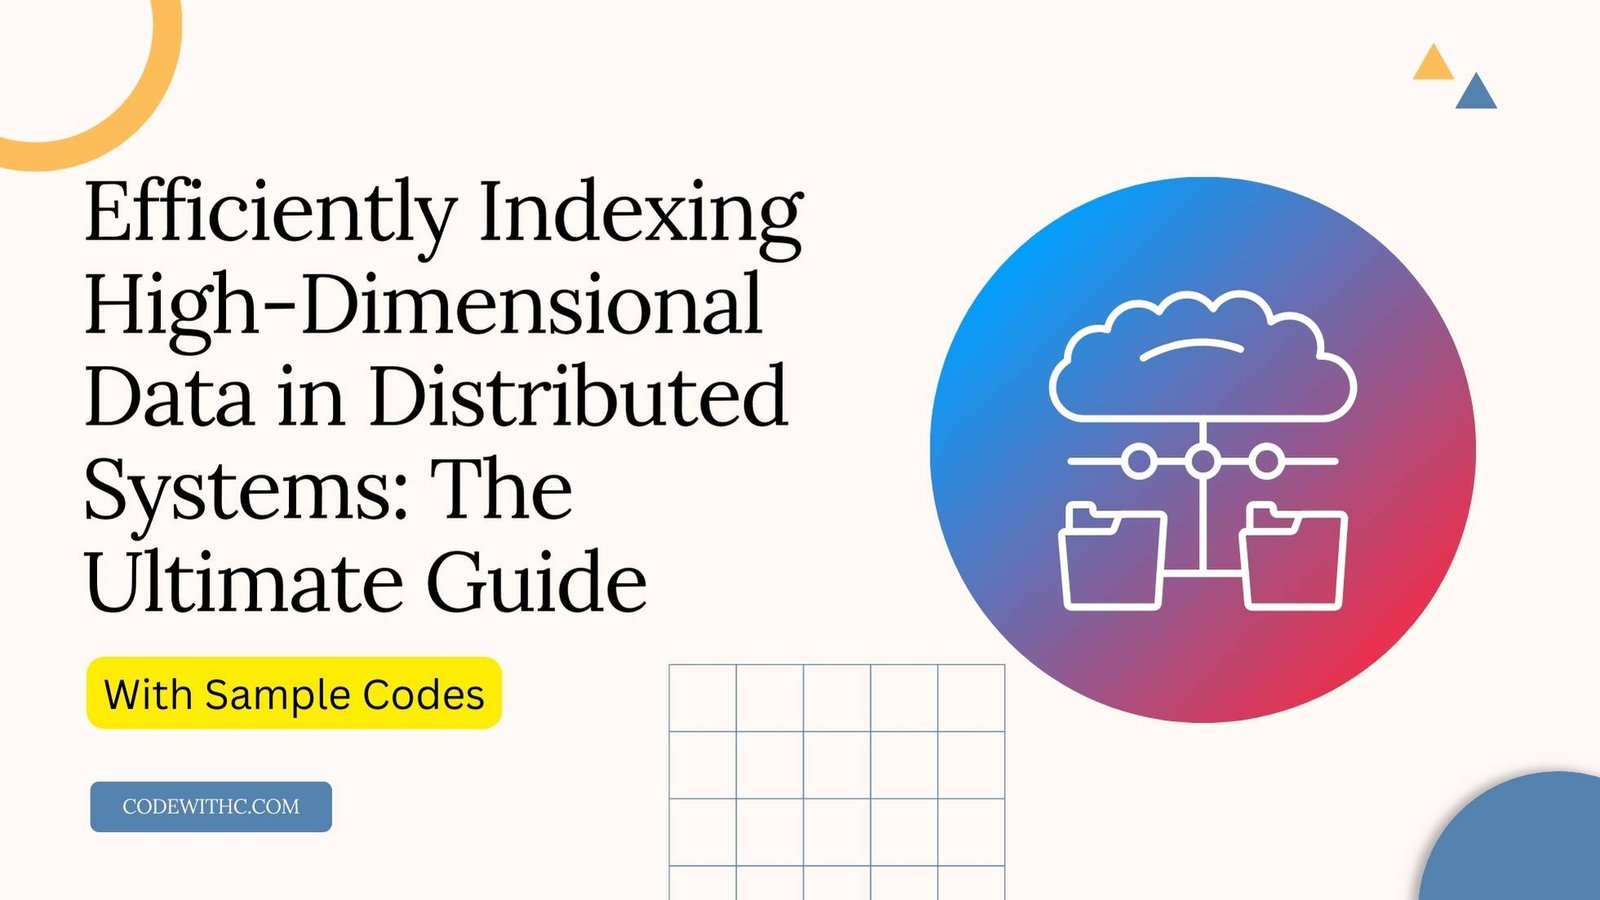 Efficiently Indexing High-Dimensional Data in Distributed Systems: The Ultimate Guide